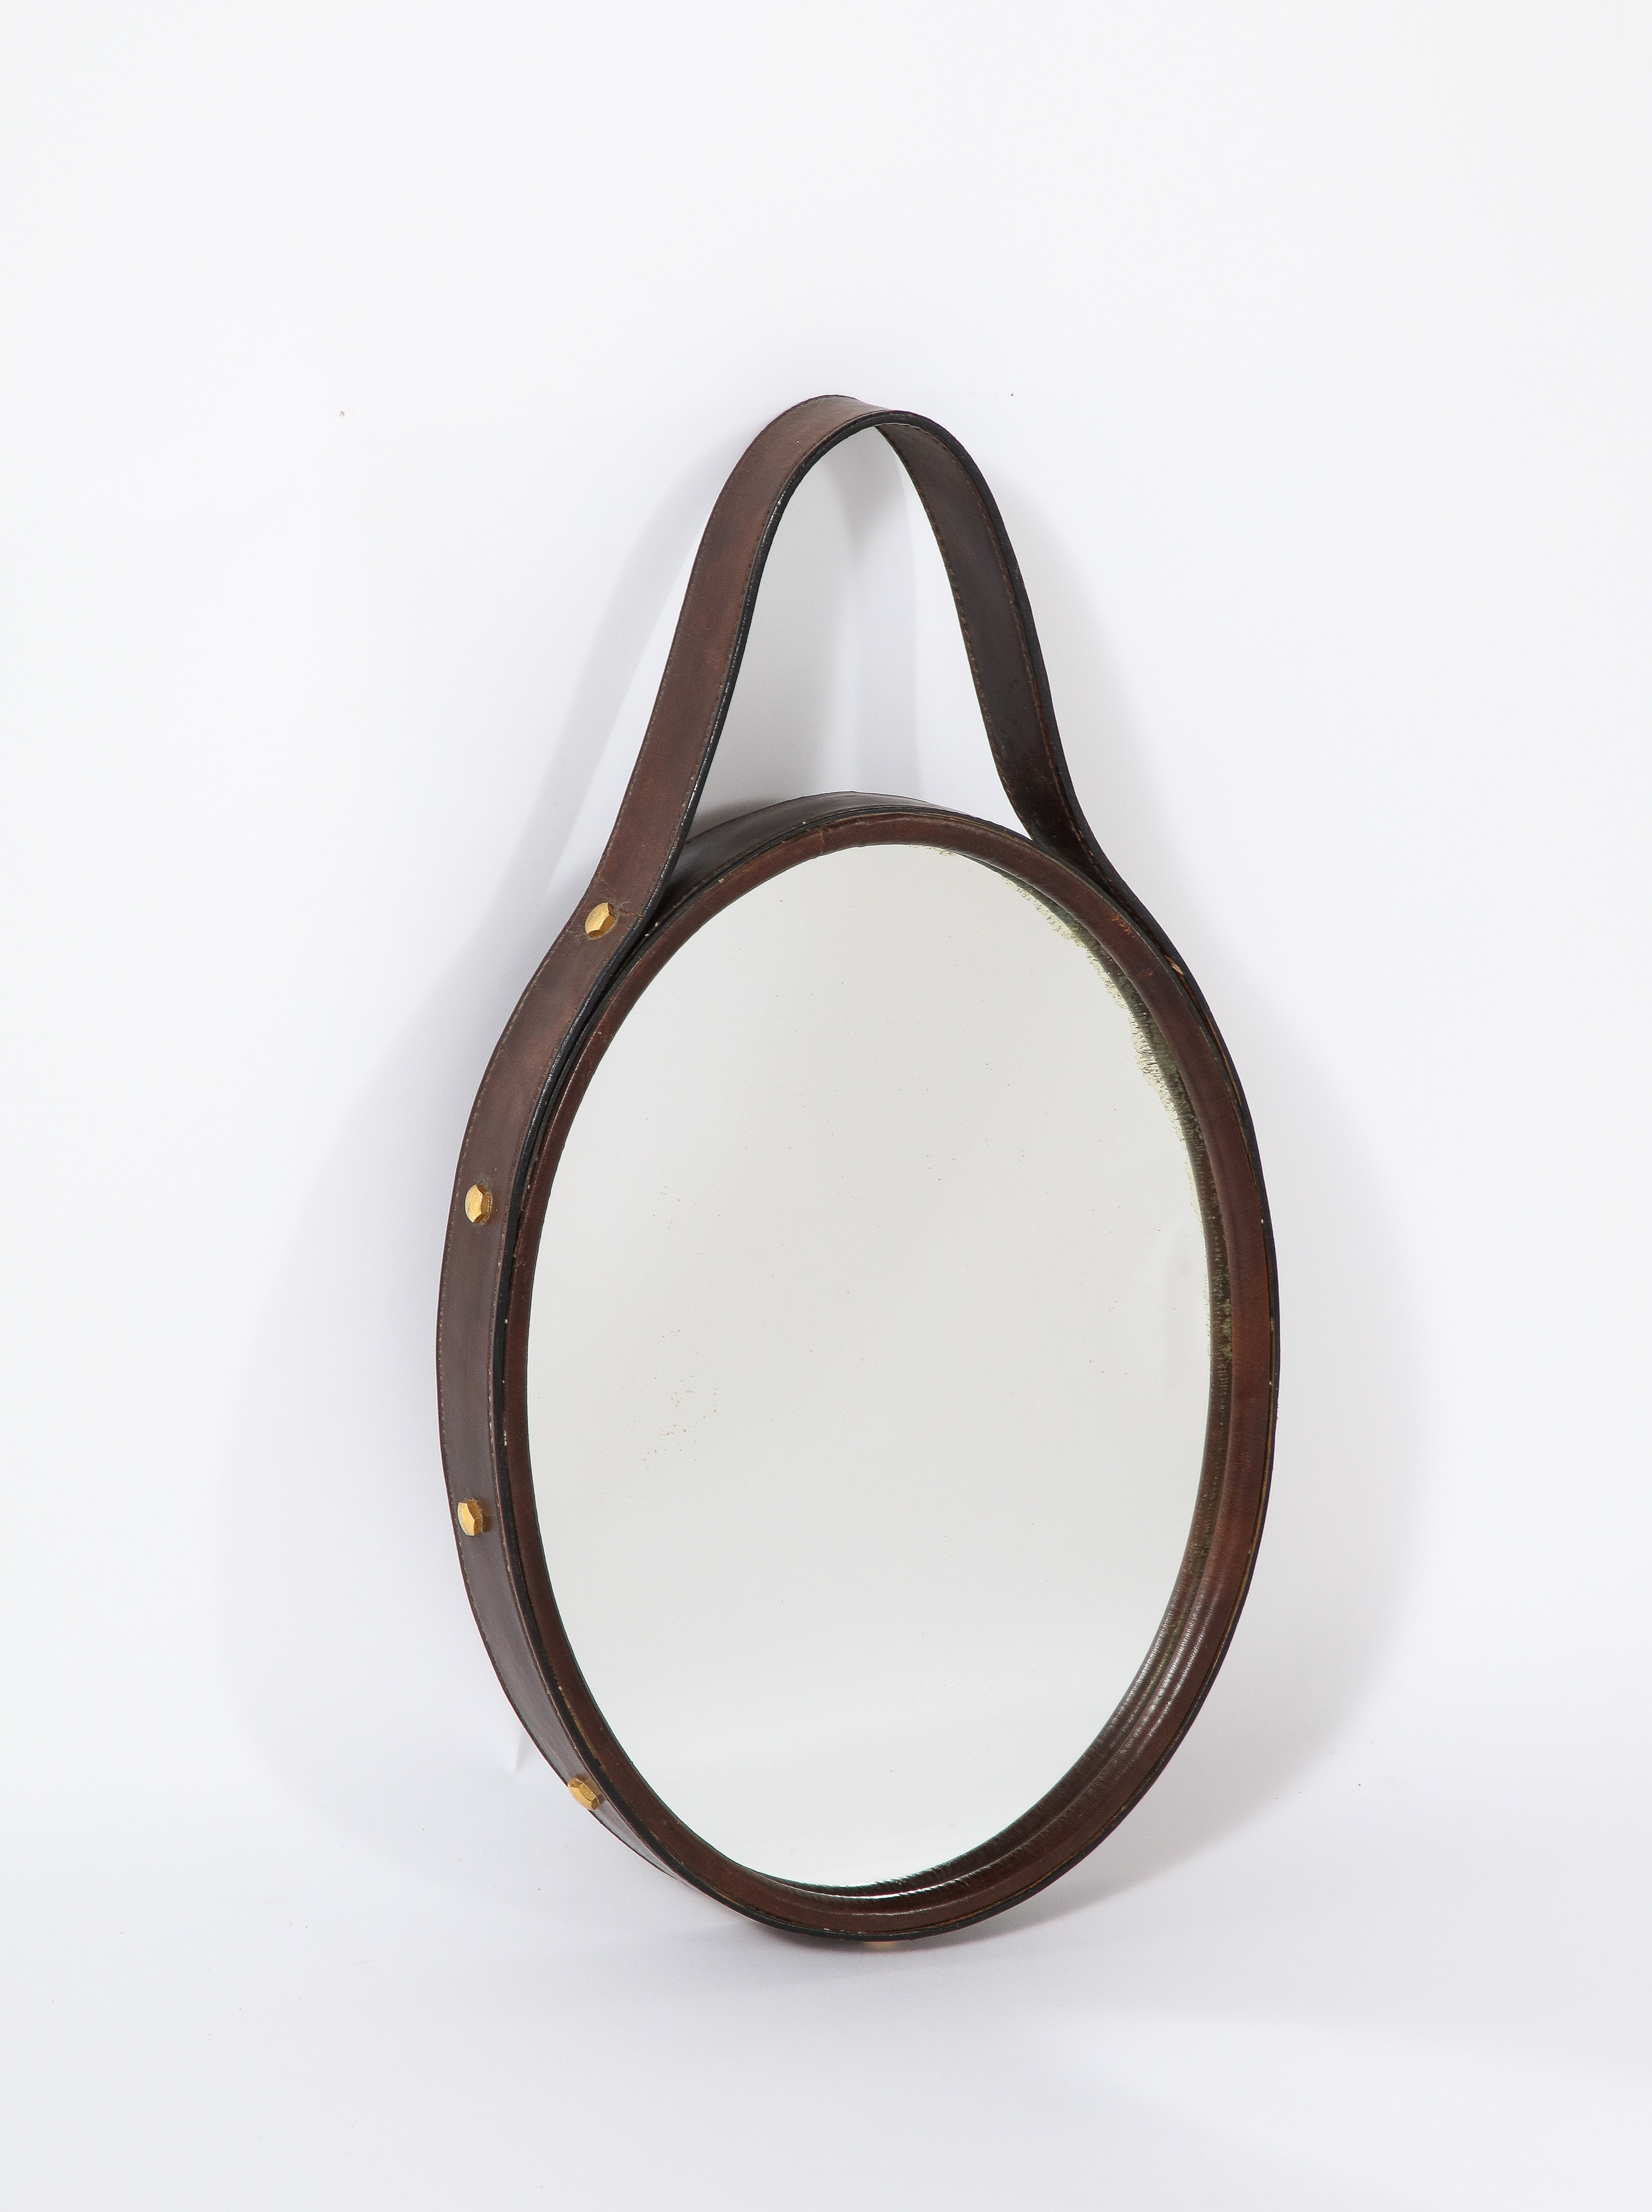 A Florentine 1960's oval framed wood mirror with a thick chocolate brown leather border and handle, the sides of the leather decorated with brass hexagonal nail heads. A highly unique and interesting wall décor.

Florence, Italy, circa